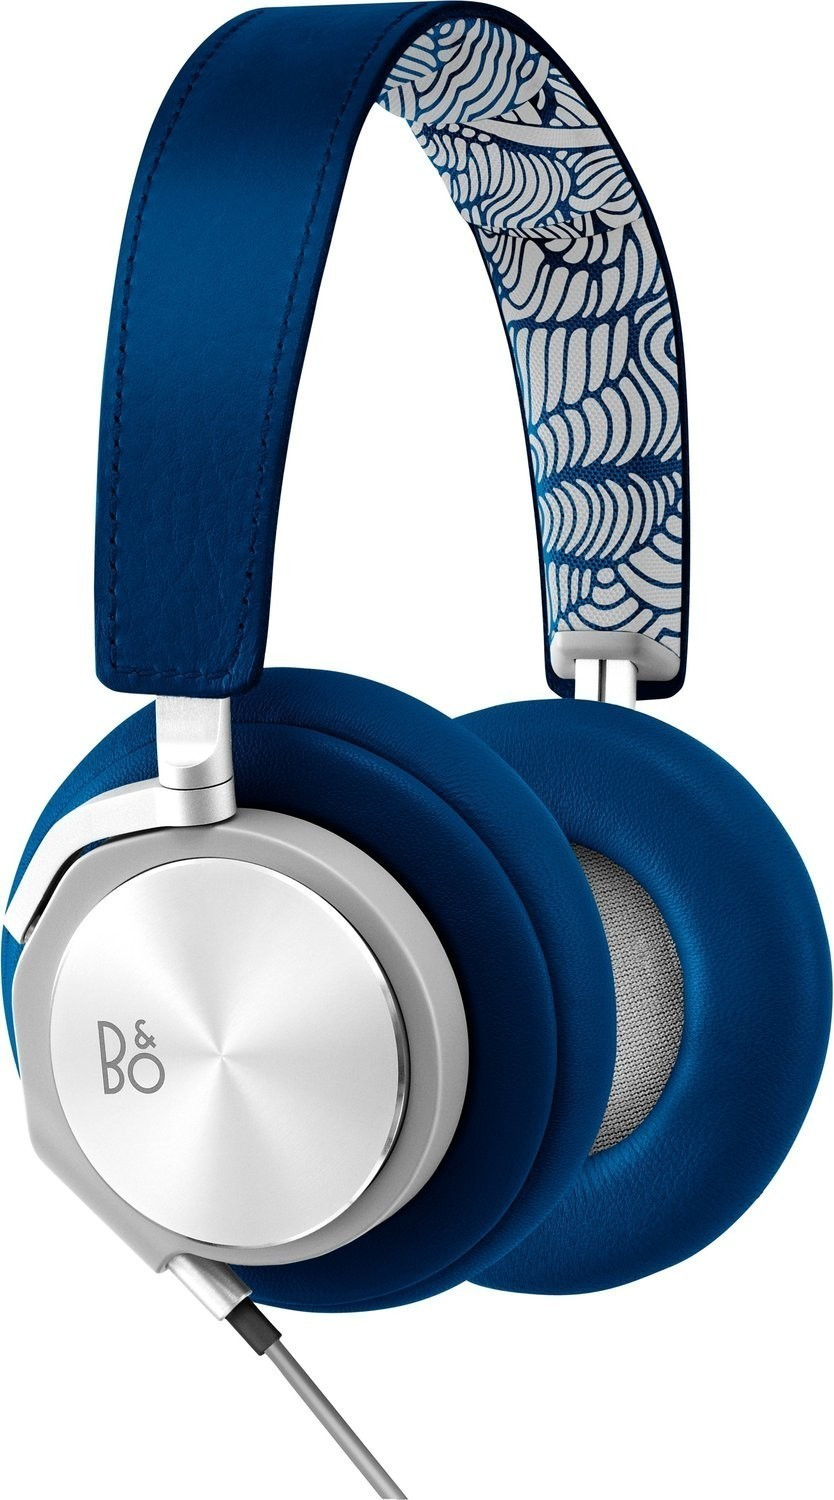 Bang & Olufsen BeoPlay H6 Limited Edition 2014 (blau)